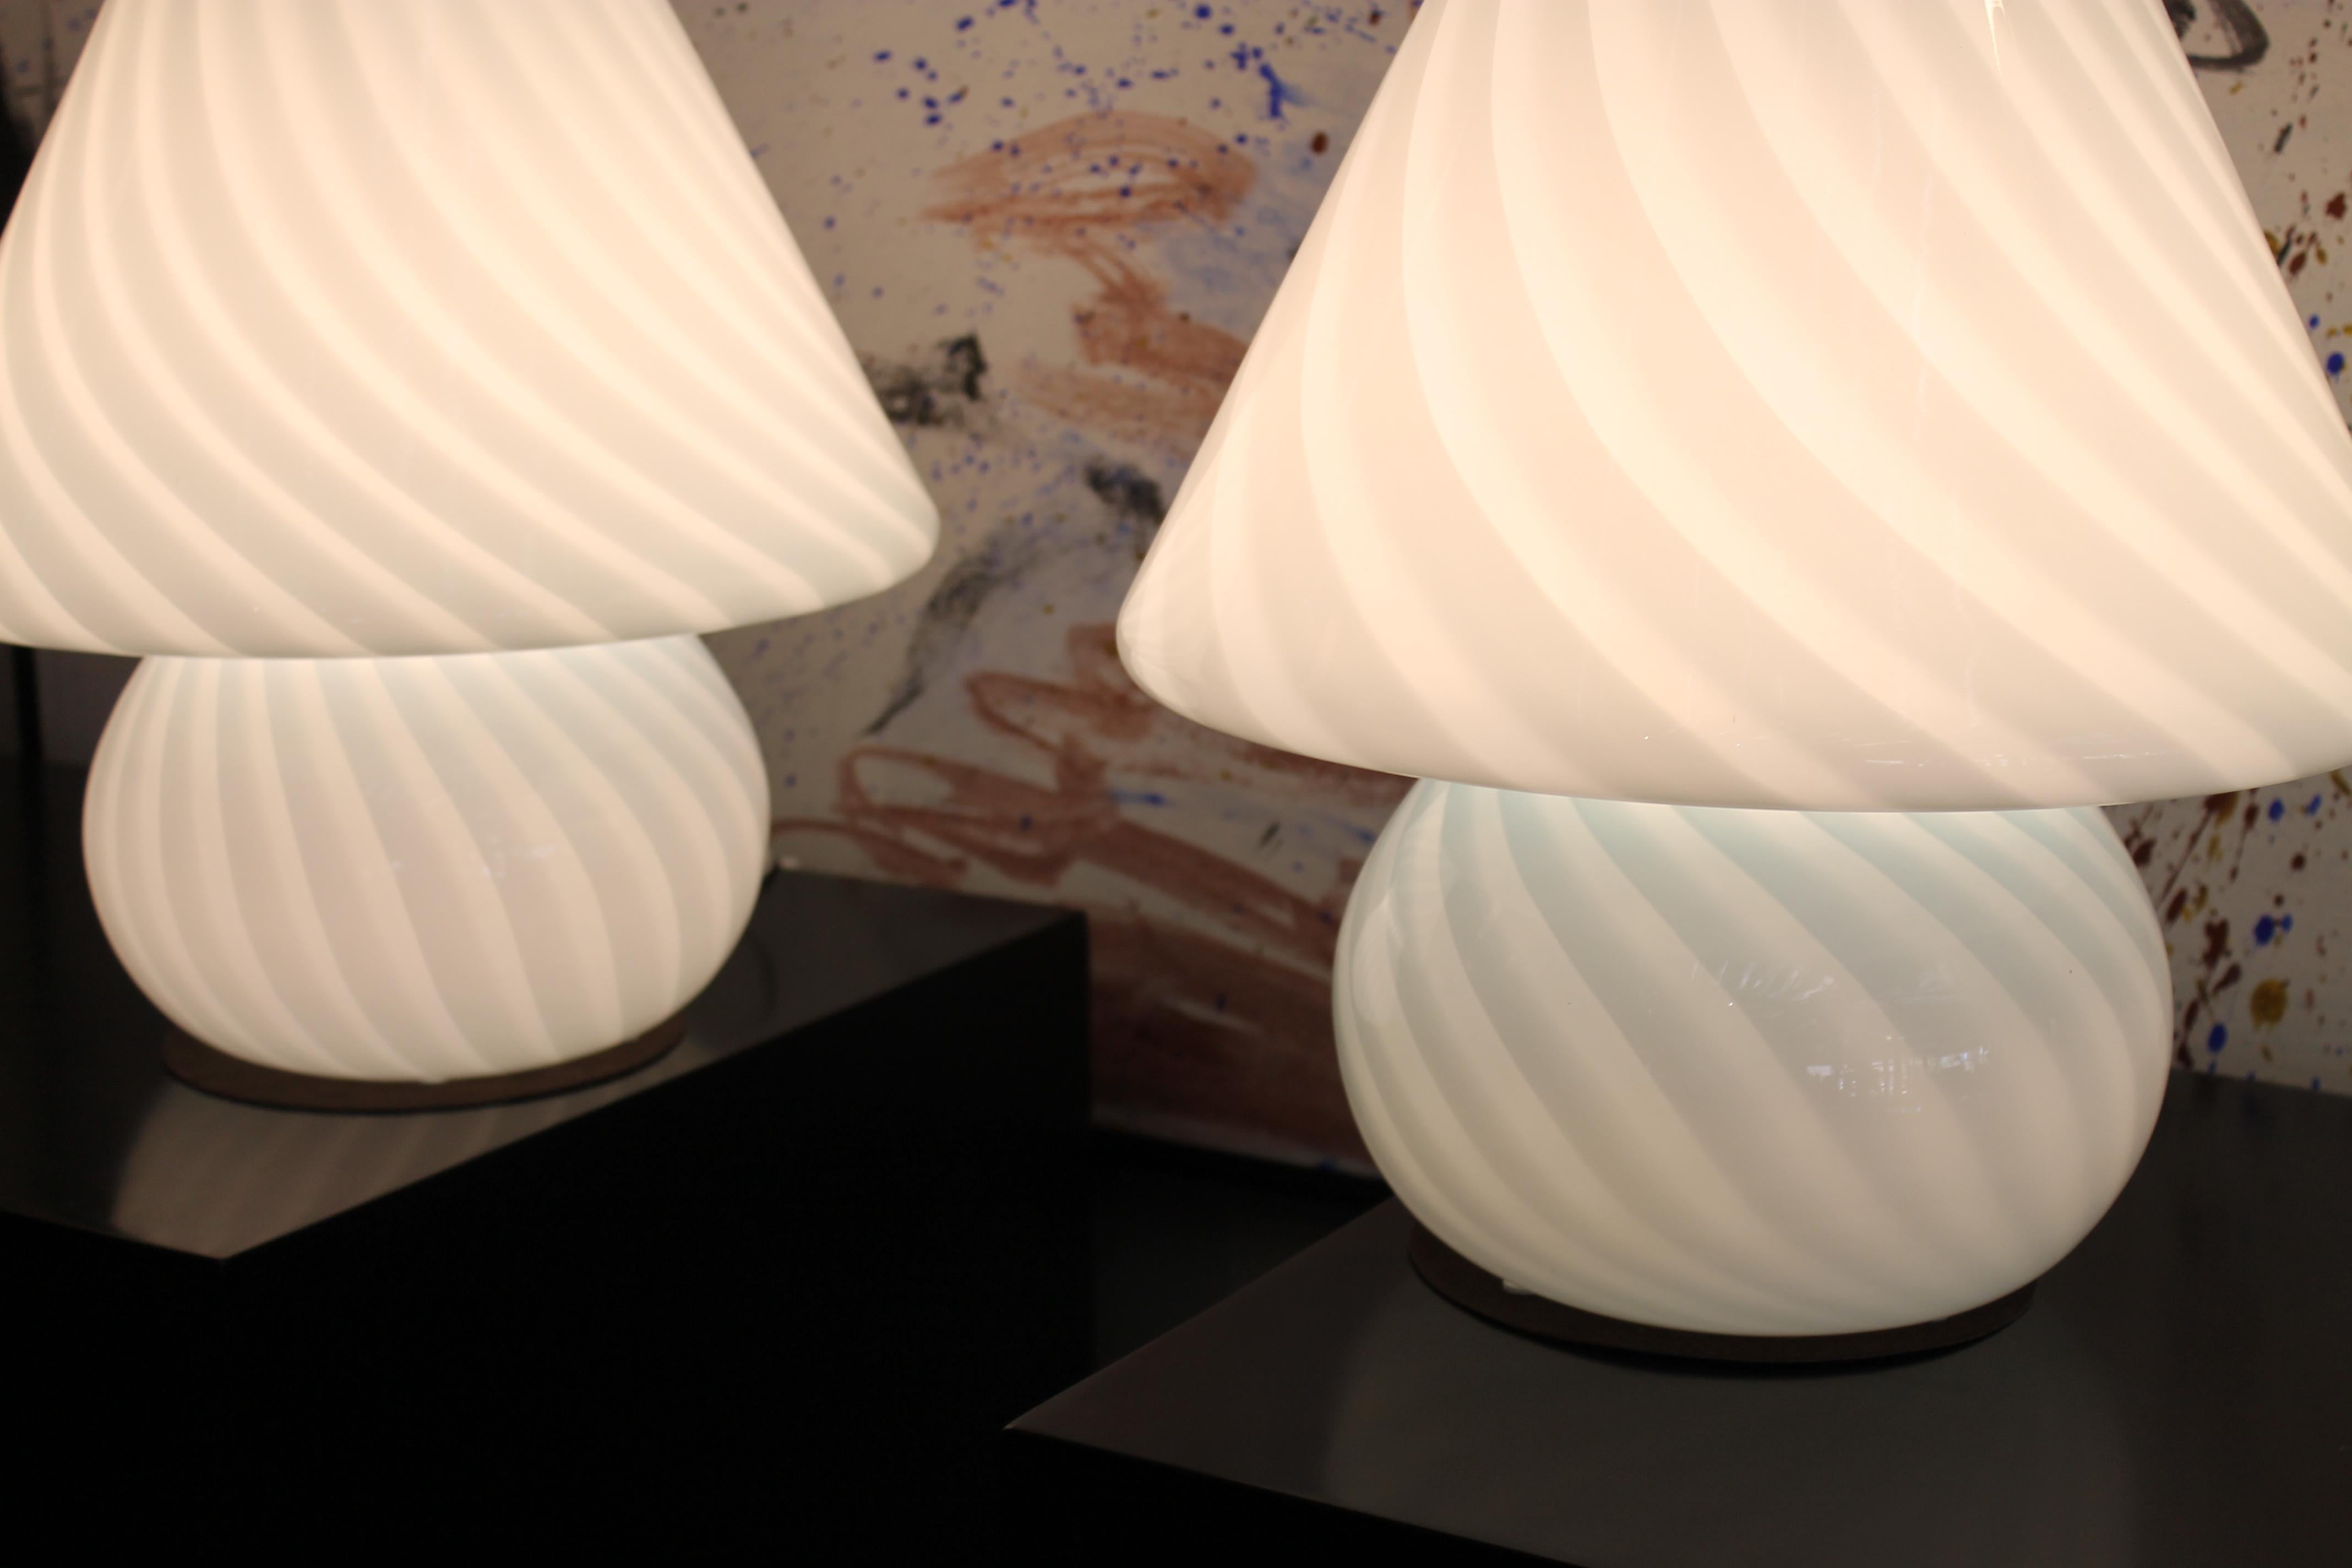 Pair of Italian white or blueish glass mushroom lamps. Each lamp measure 14” diameter and 15” high. These are the LARGER versions. They have been professionally rewired and have an on/off switch. Maximum wattage would be a 60 watt bulb.  Please note